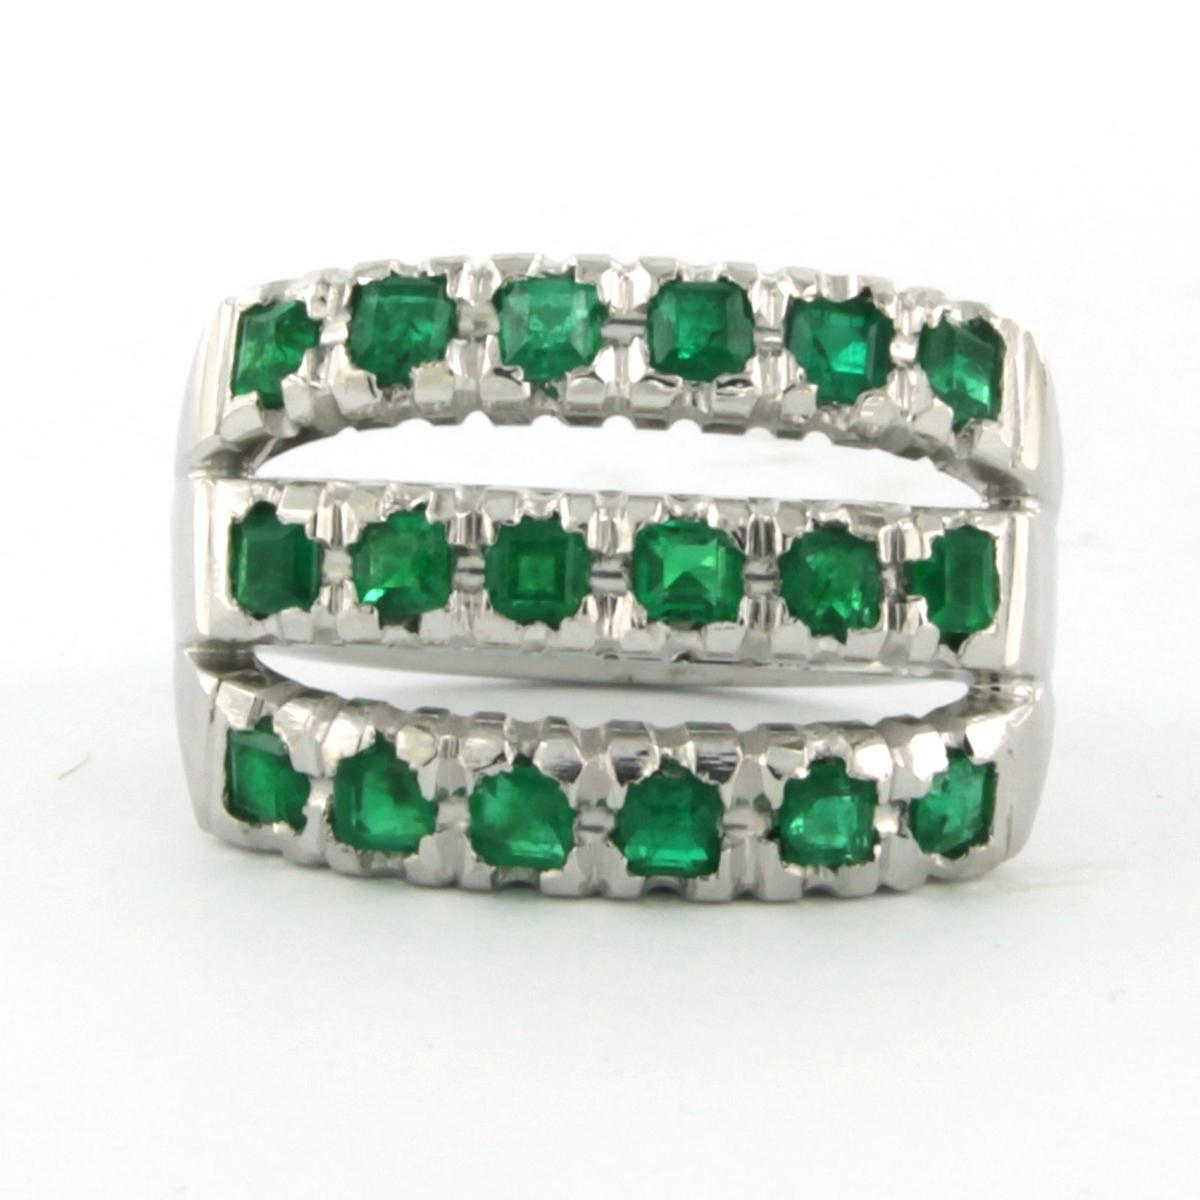 18 kt white gold ring set with carre cut emerald tot. 3.50 ct - ringsize U.S. 7.25 - EU. 17.5 (55)

detailed description:

the top of the ring is 1.6 cm wide

weight 14.6 grams

ring size U.S. 7.25 - EU. 17.5 (55), ring can be enlarged or reduced by